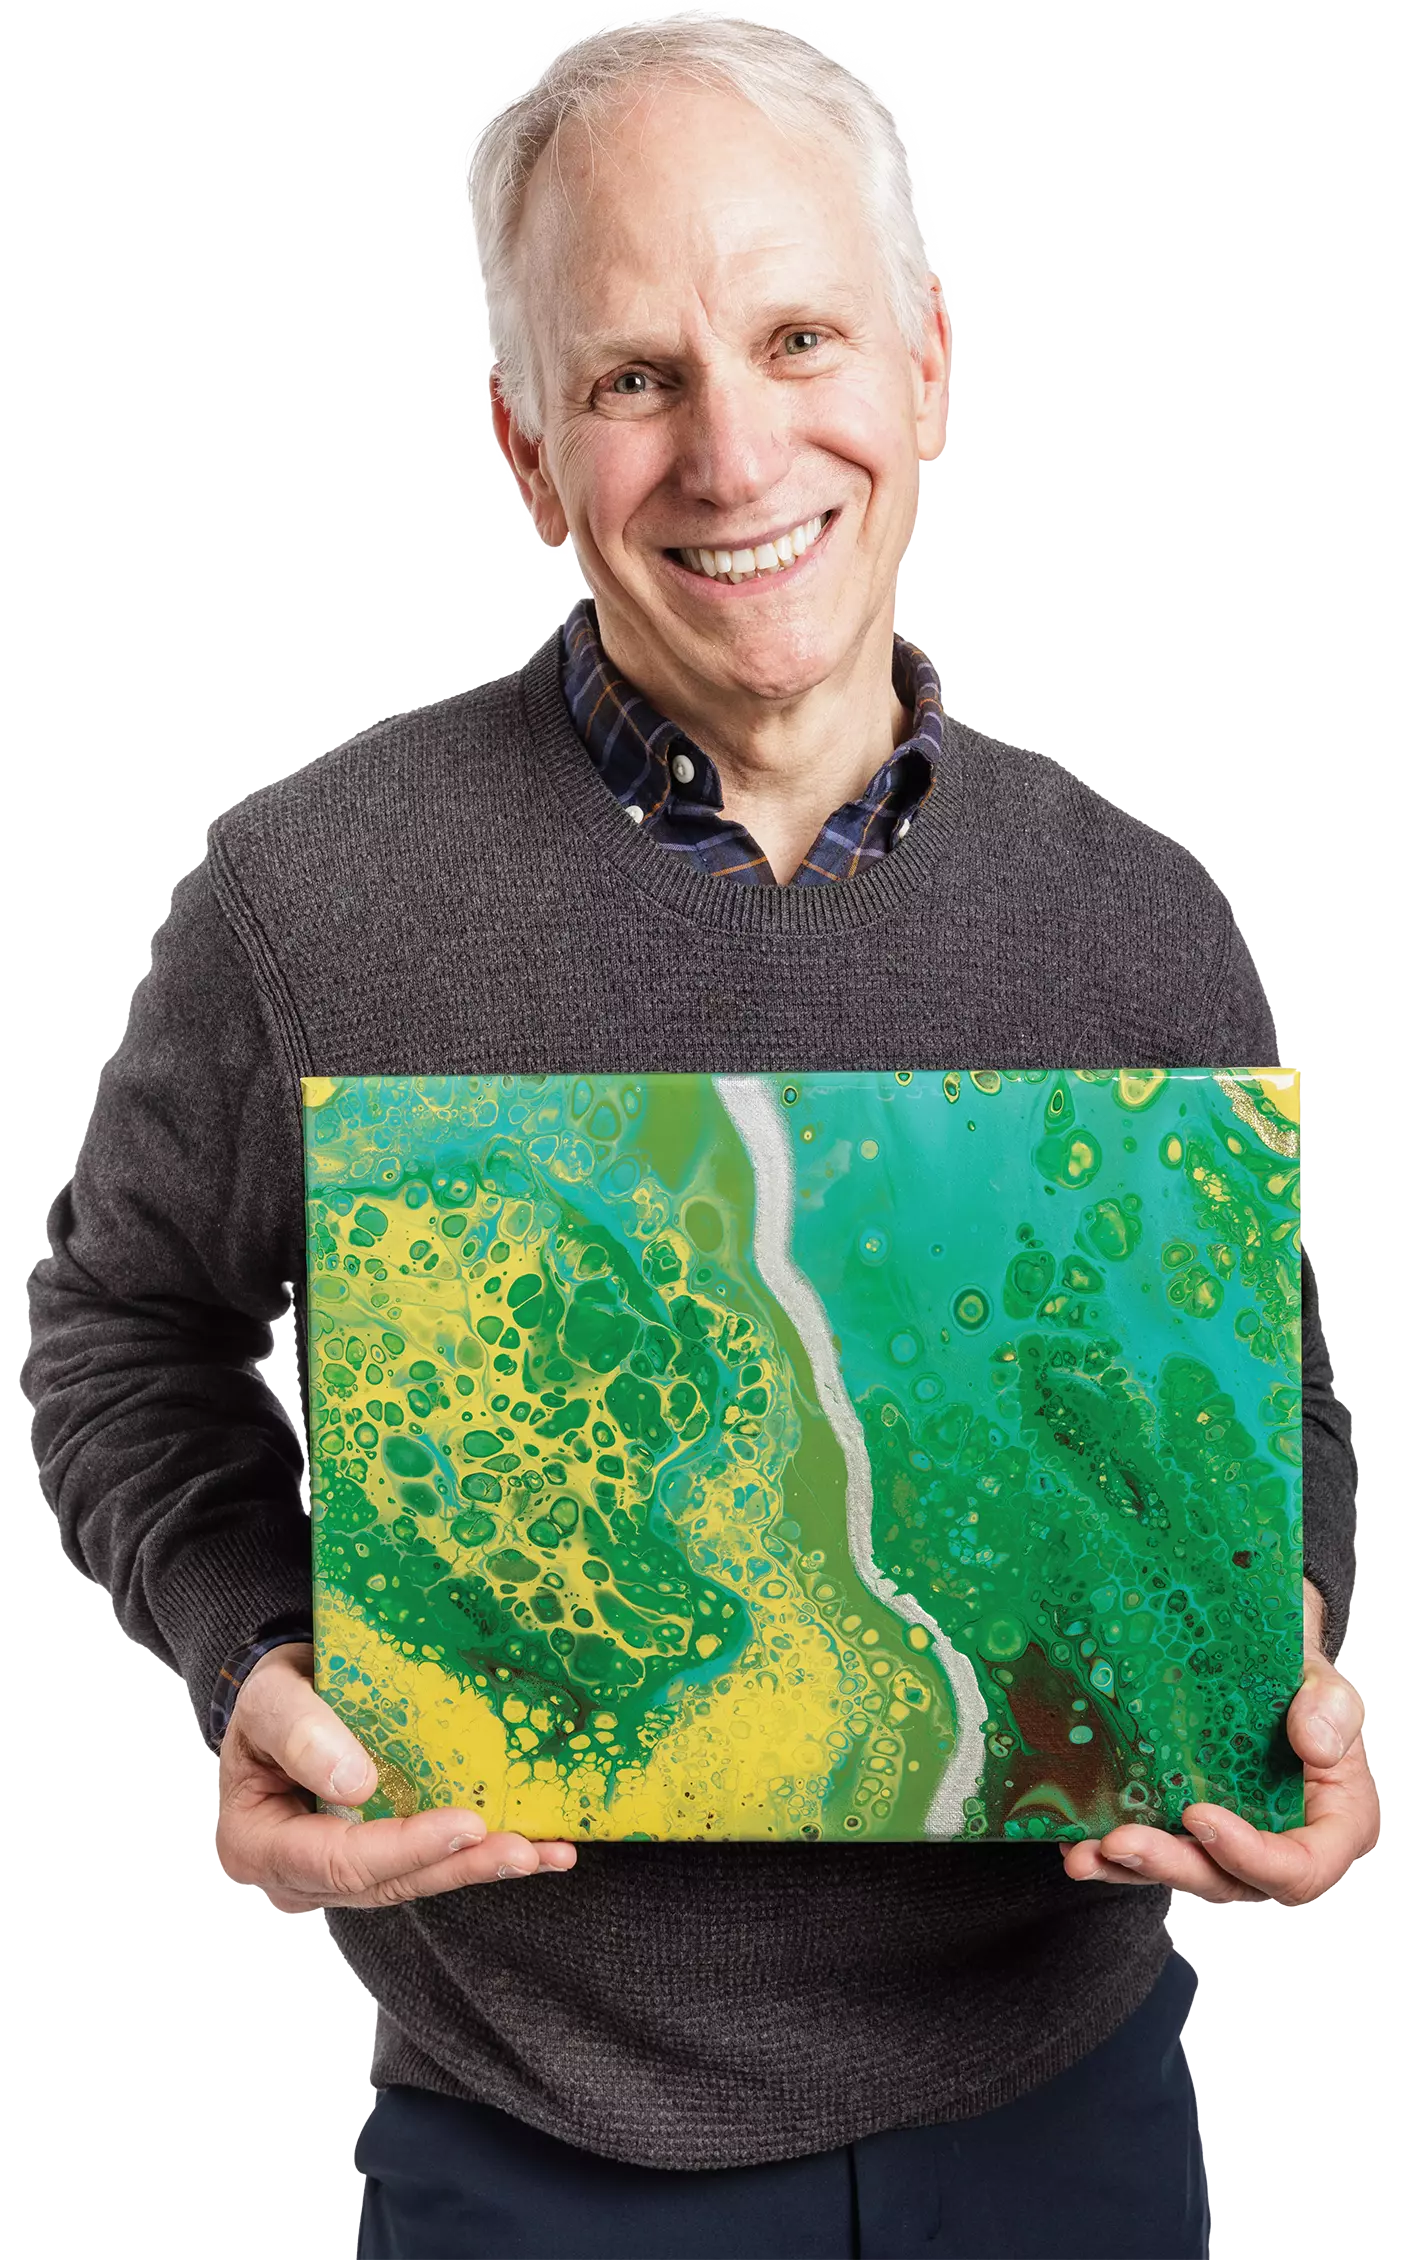 A man in a sweater holding a painting of green and yellow paint ripples and a silver streak running through the middle.